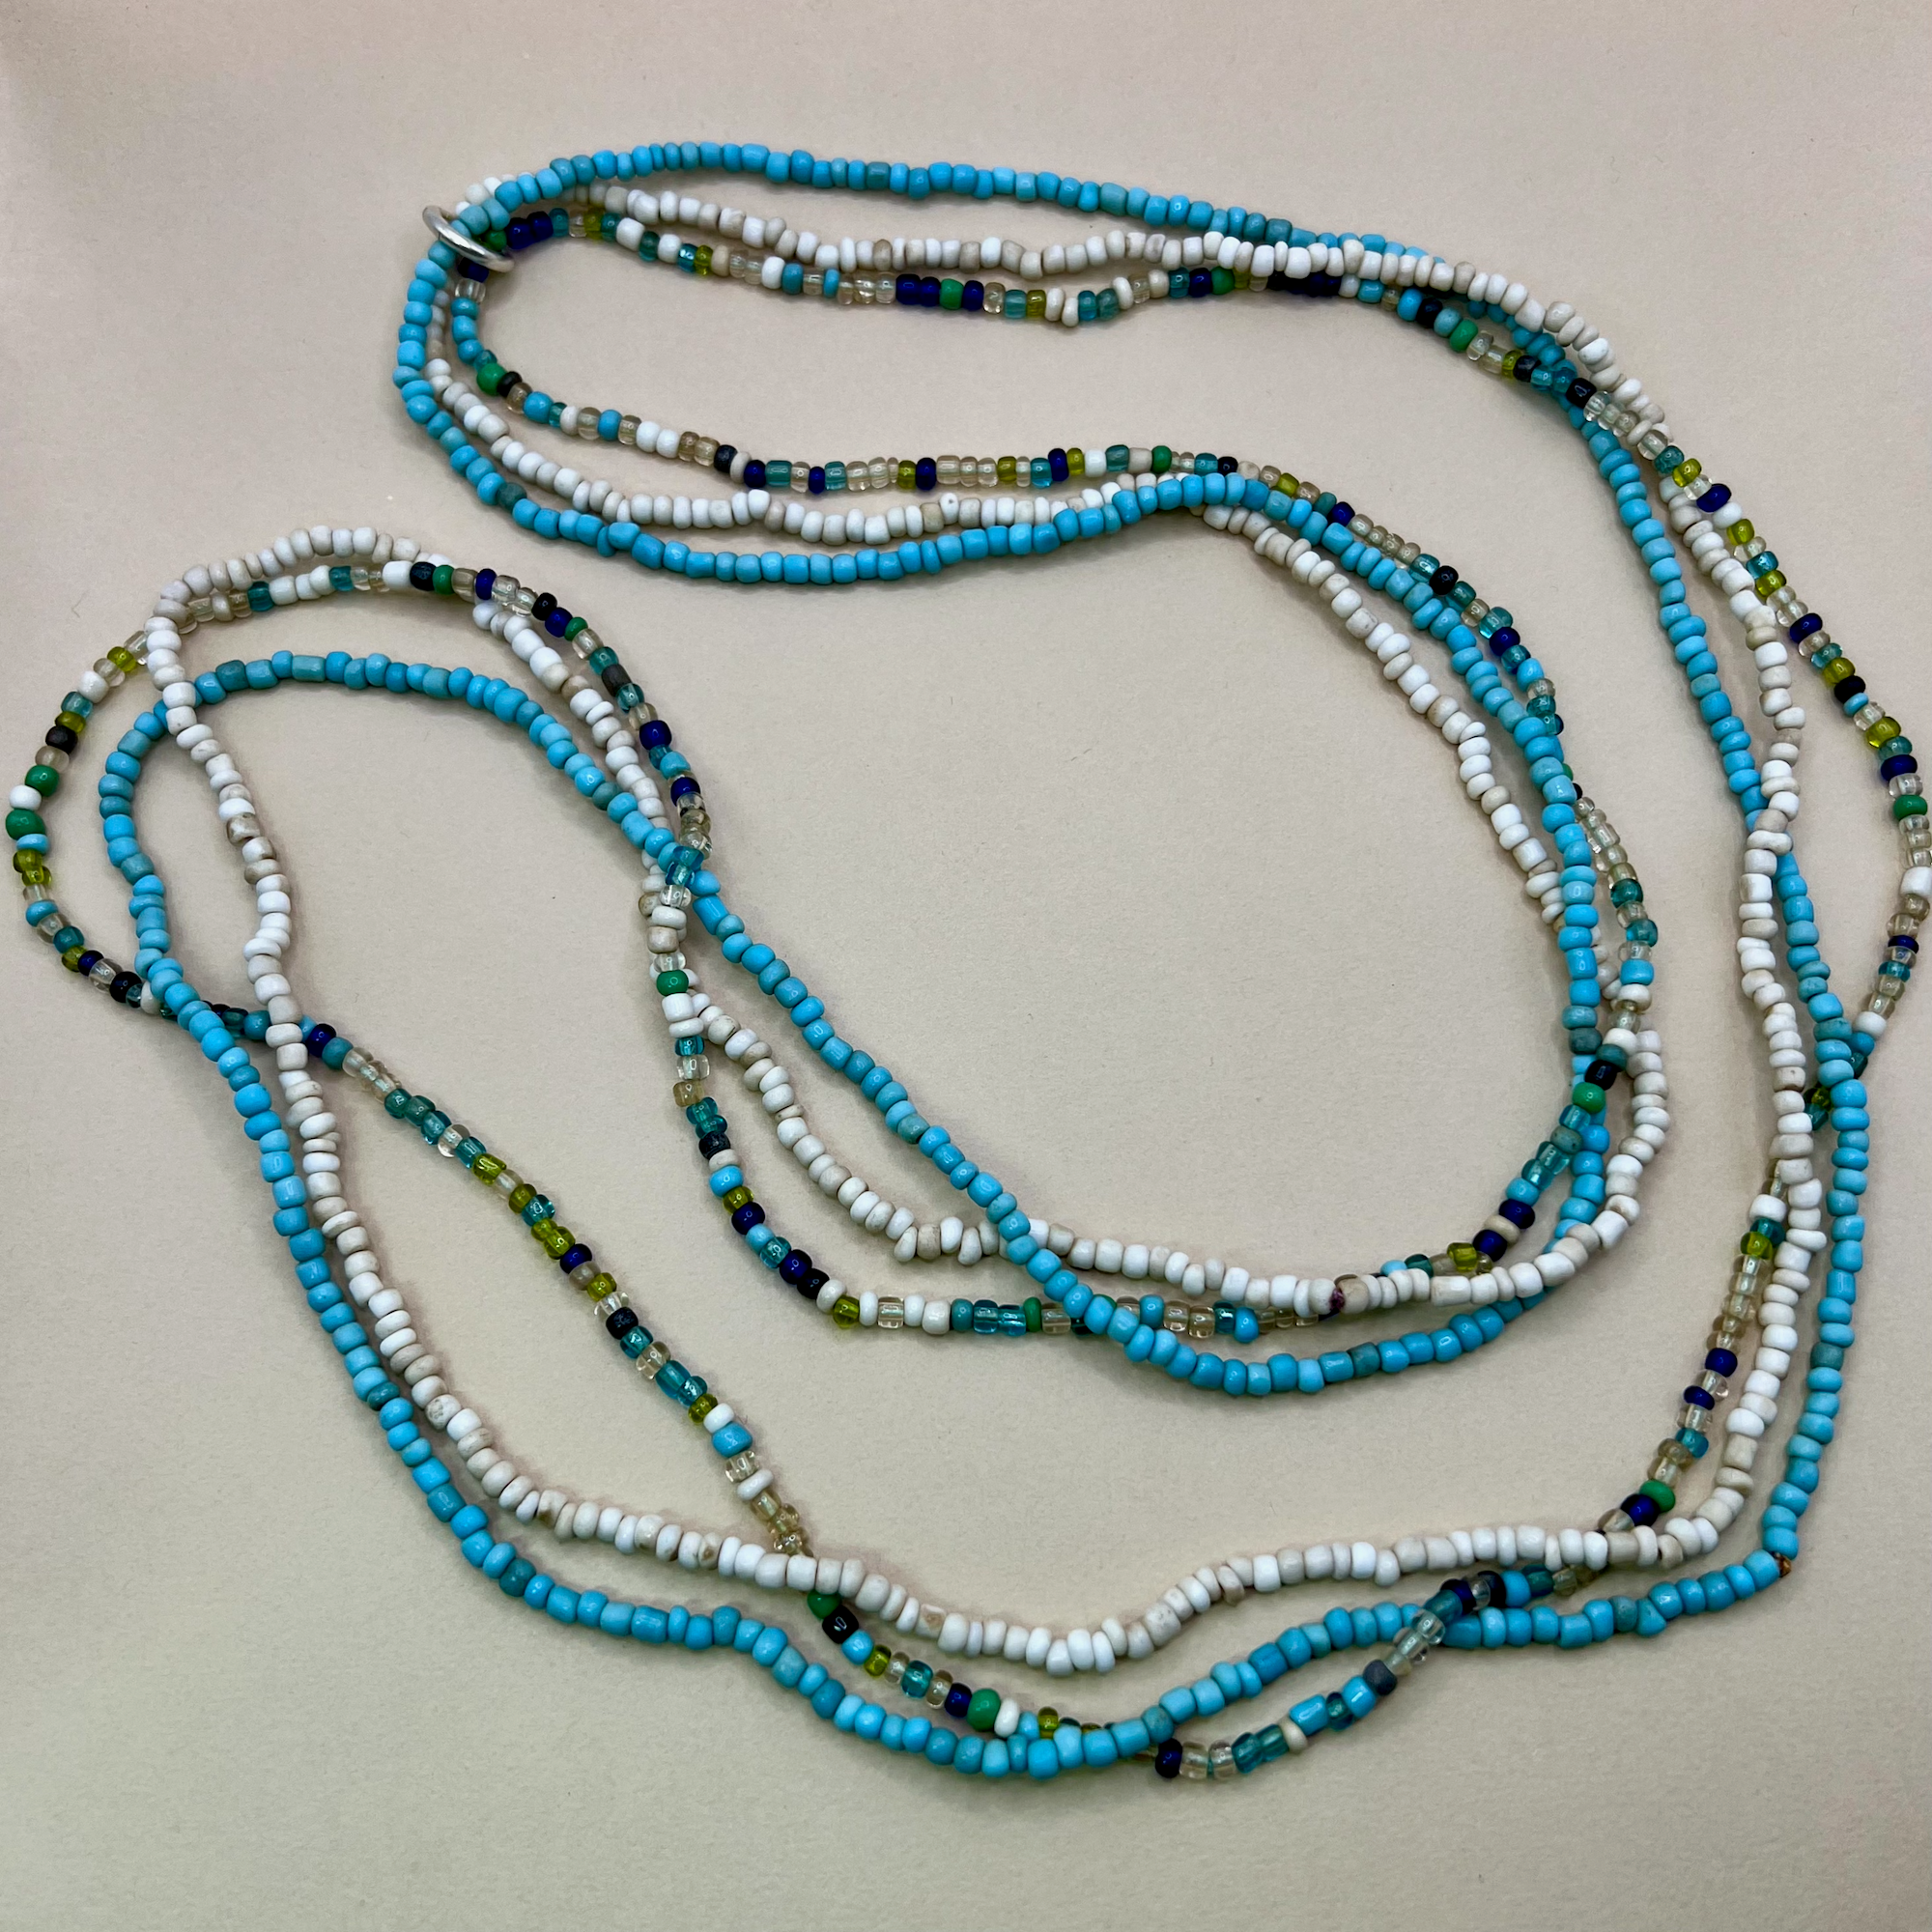 Three Strand Indonesian Glass Long Necklaces - Light Blue, White, Ocean